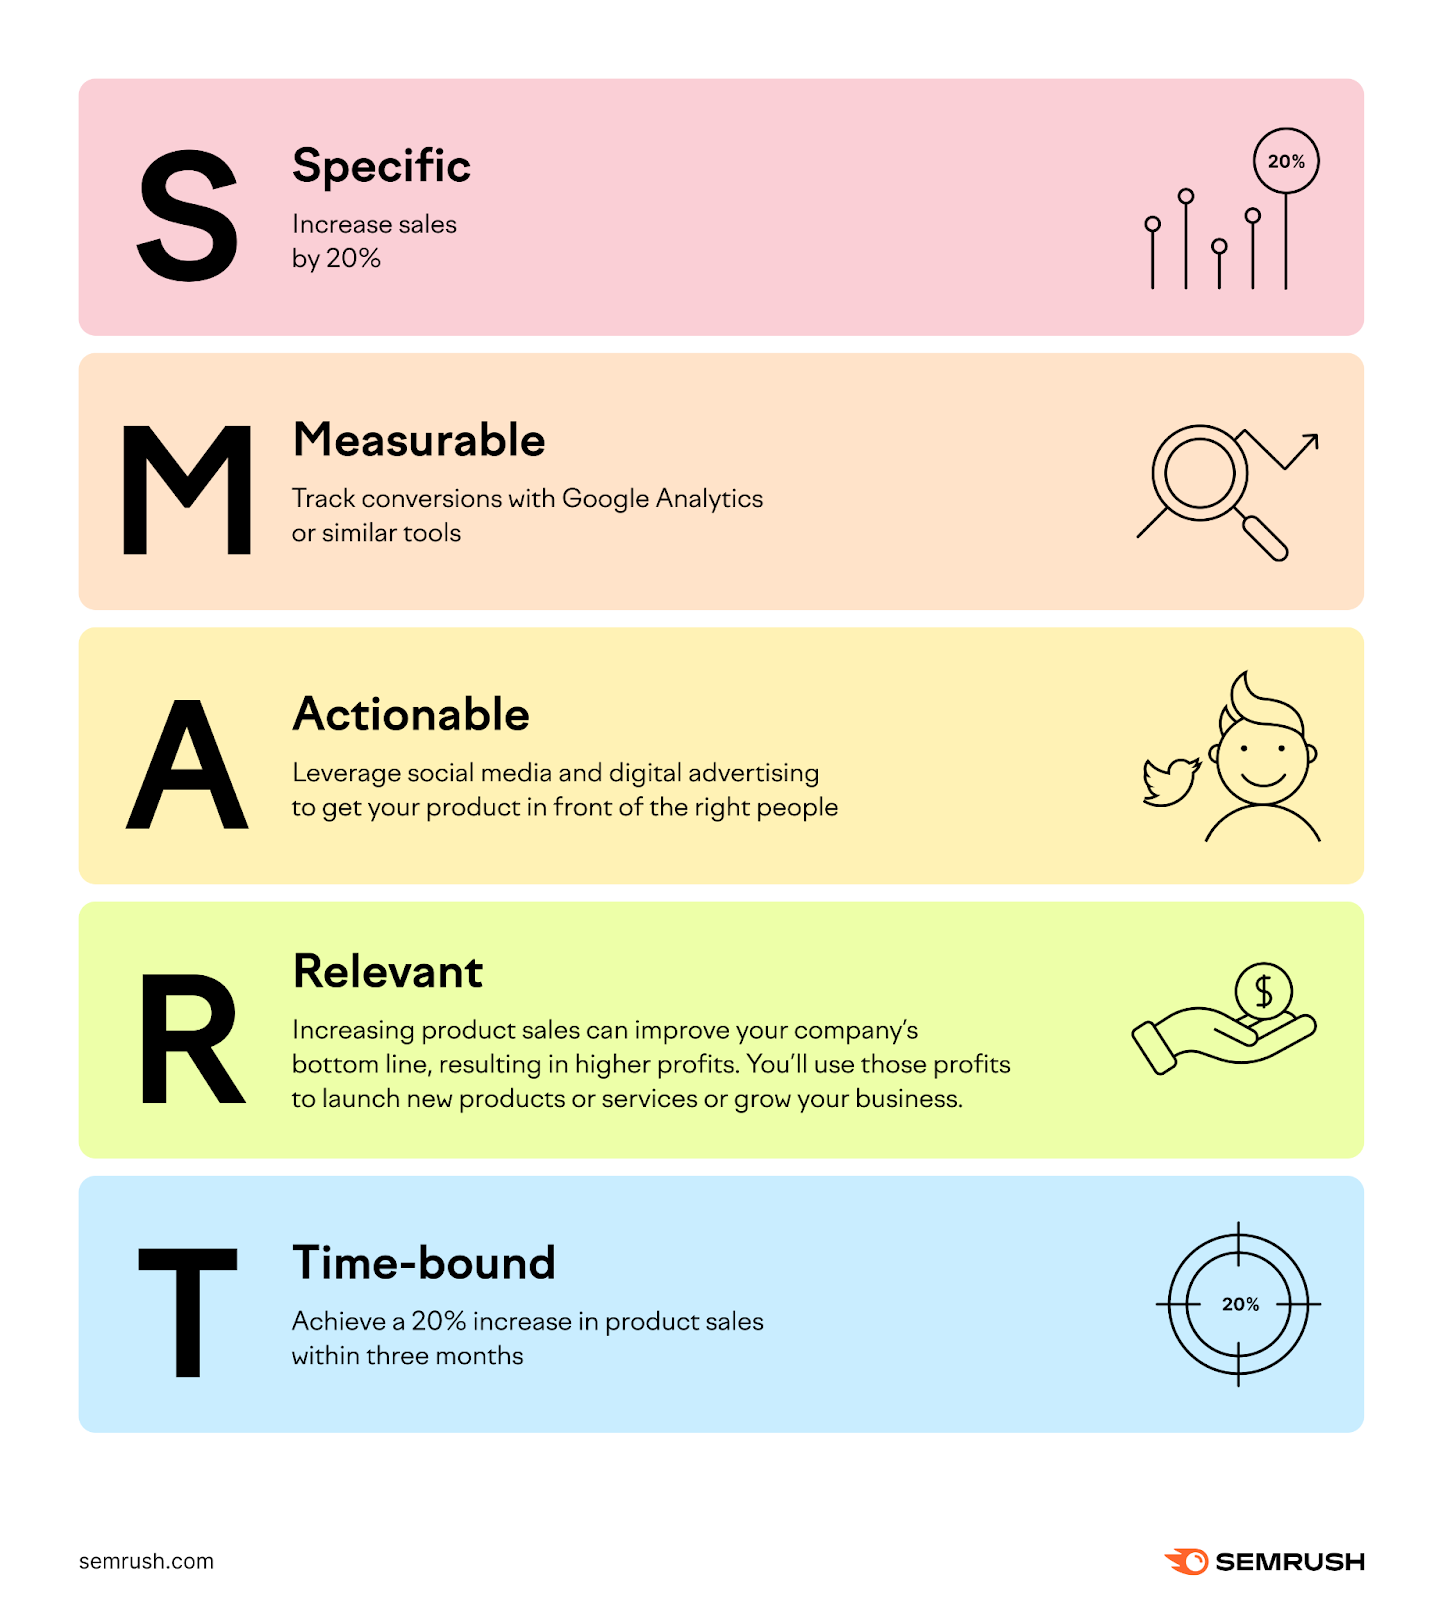 SMART (Specific, Measurable, Actionable, Relevant, and Timebound) framework overview